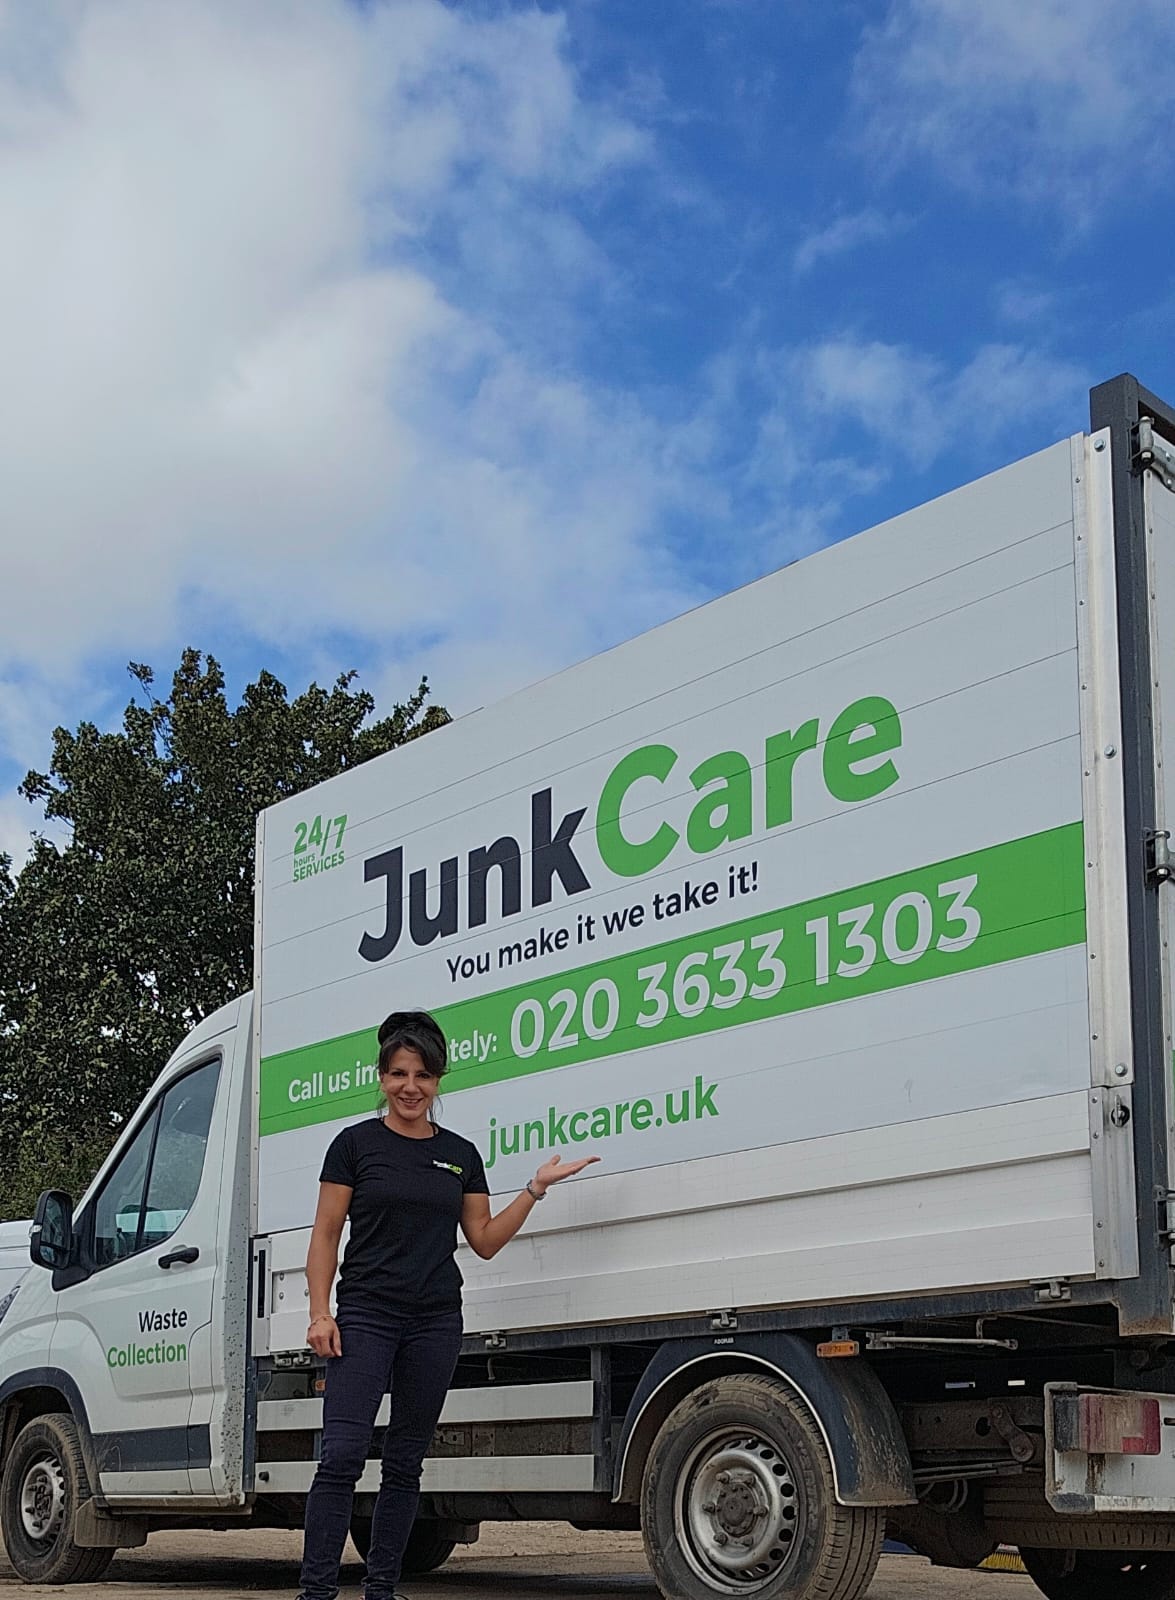 How to clear the green waste at home, by JunkCare